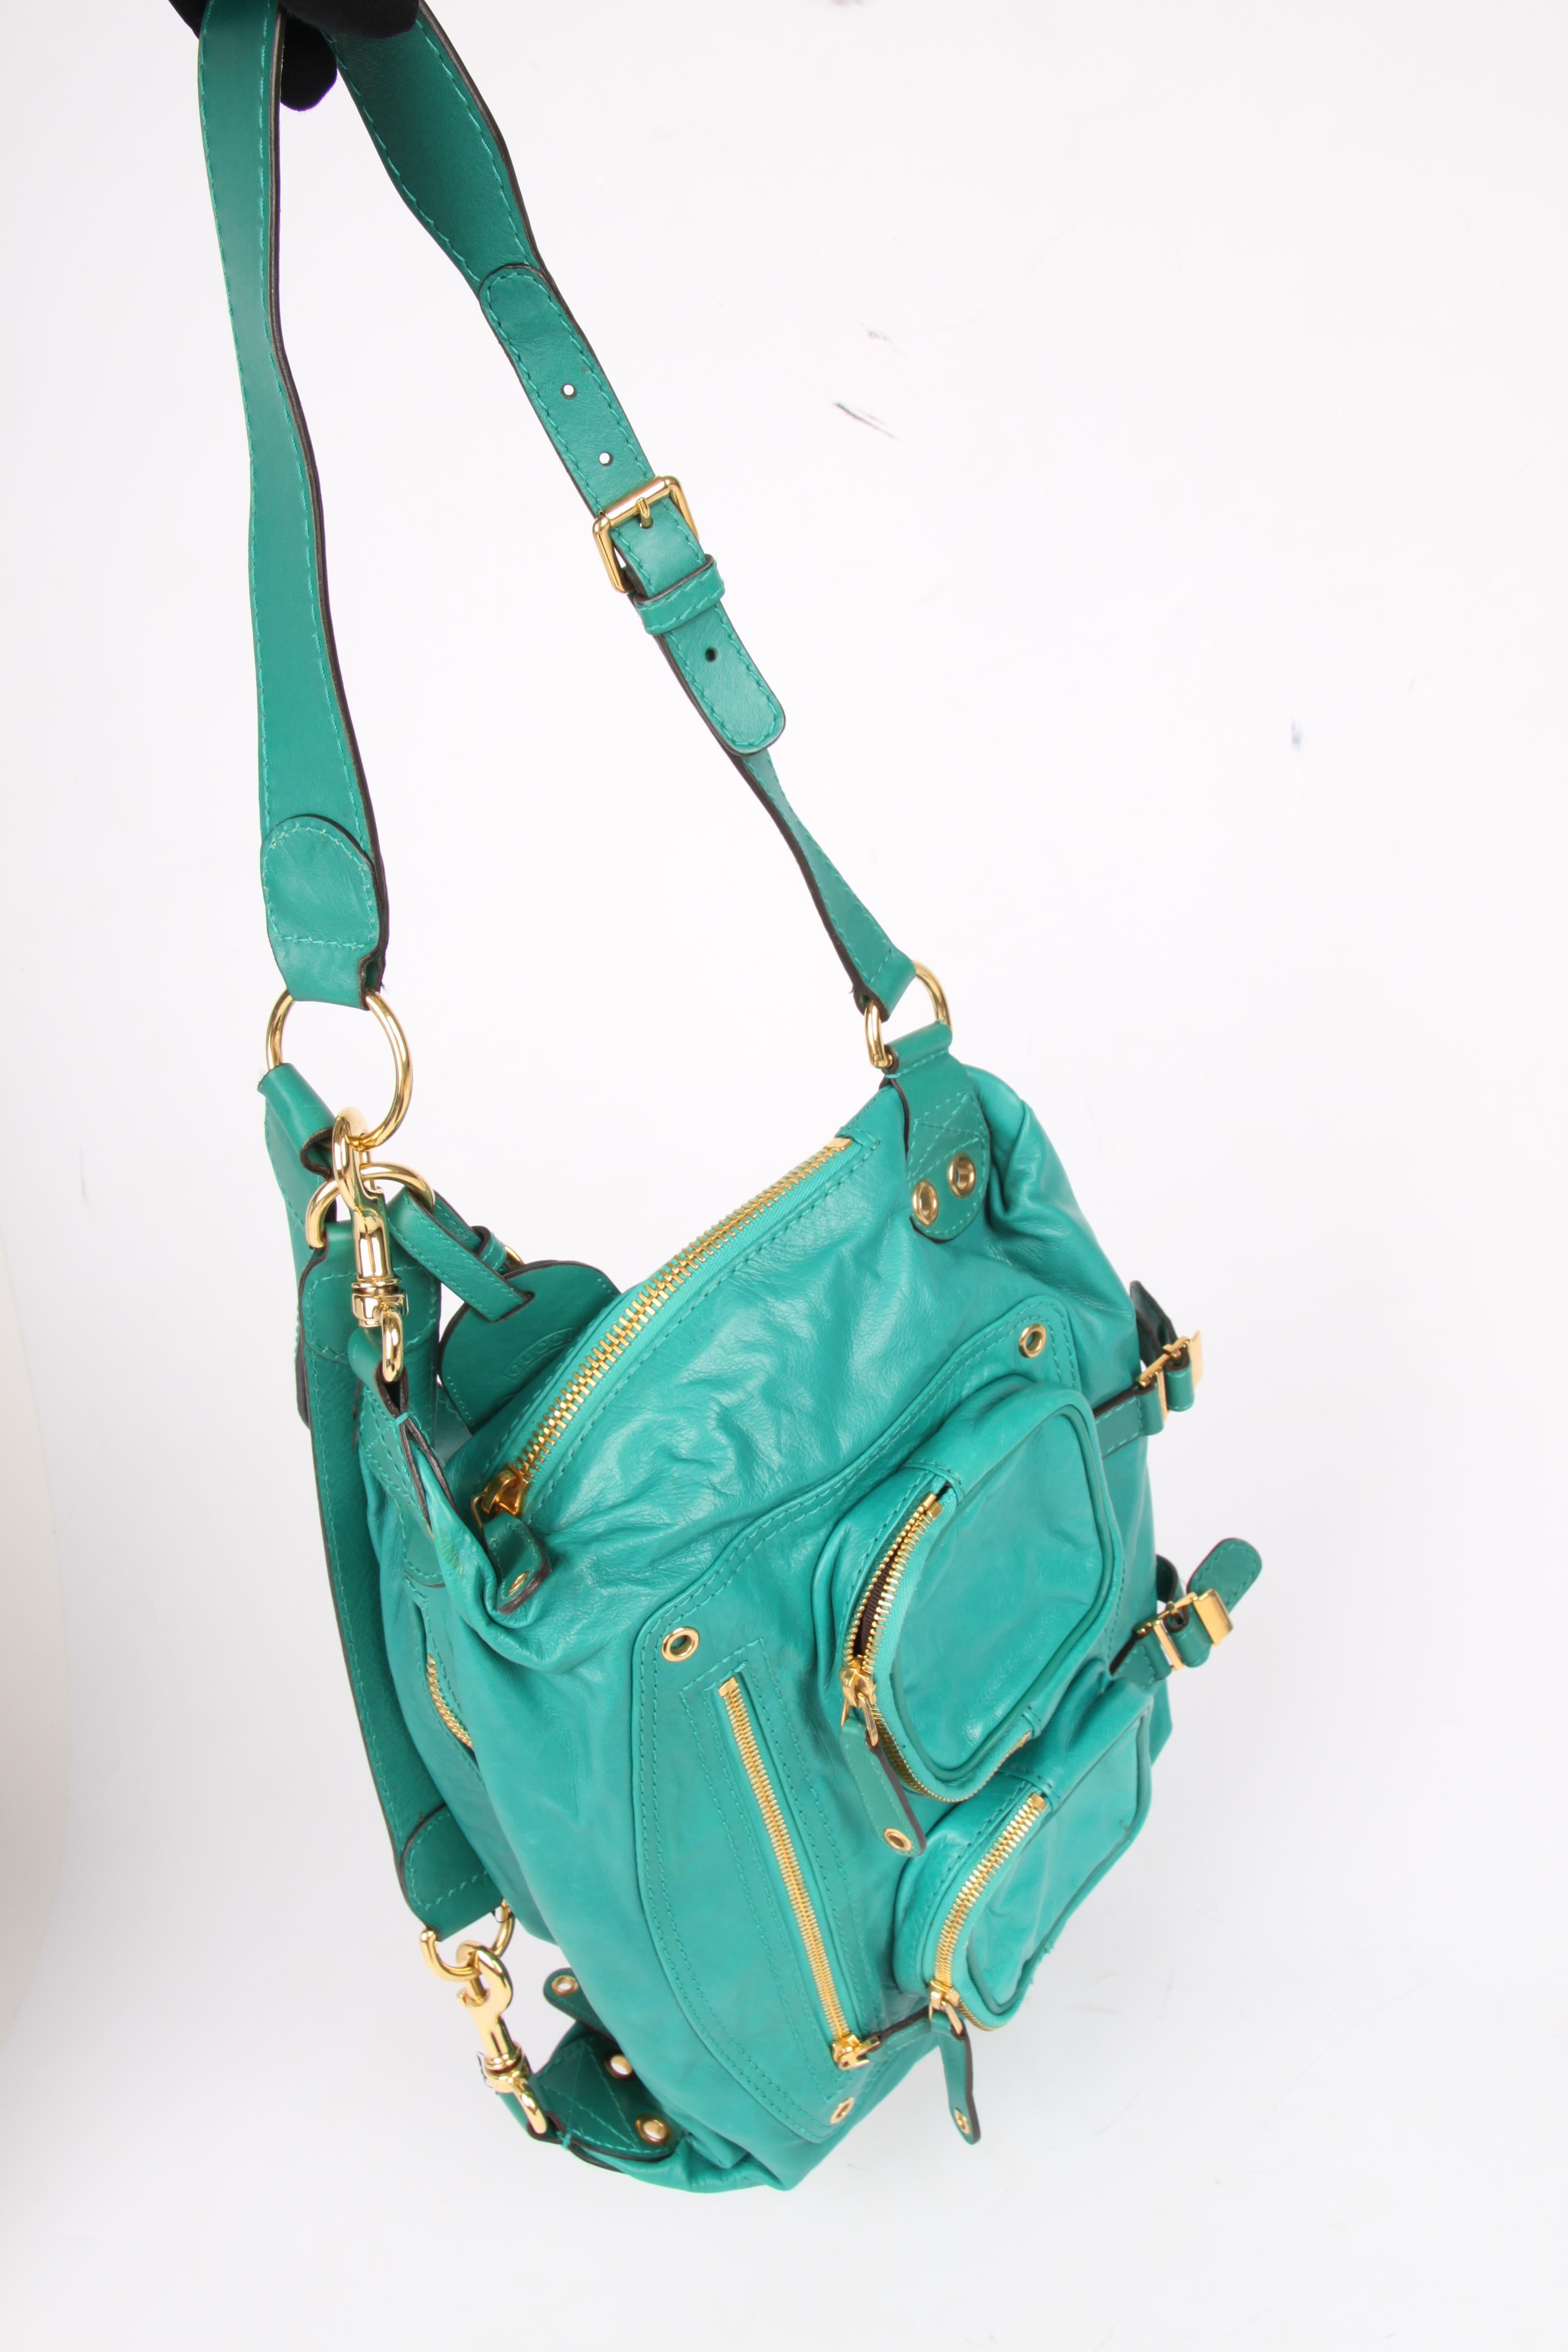 This Gucci Darwin Convertible Medium backpack is excellent on a trip or just running errands; hands-free convenience!

Crafted from green leather with gold-tone hardware. Three zipped pockets at the front and one on each side of the bag. Lining in